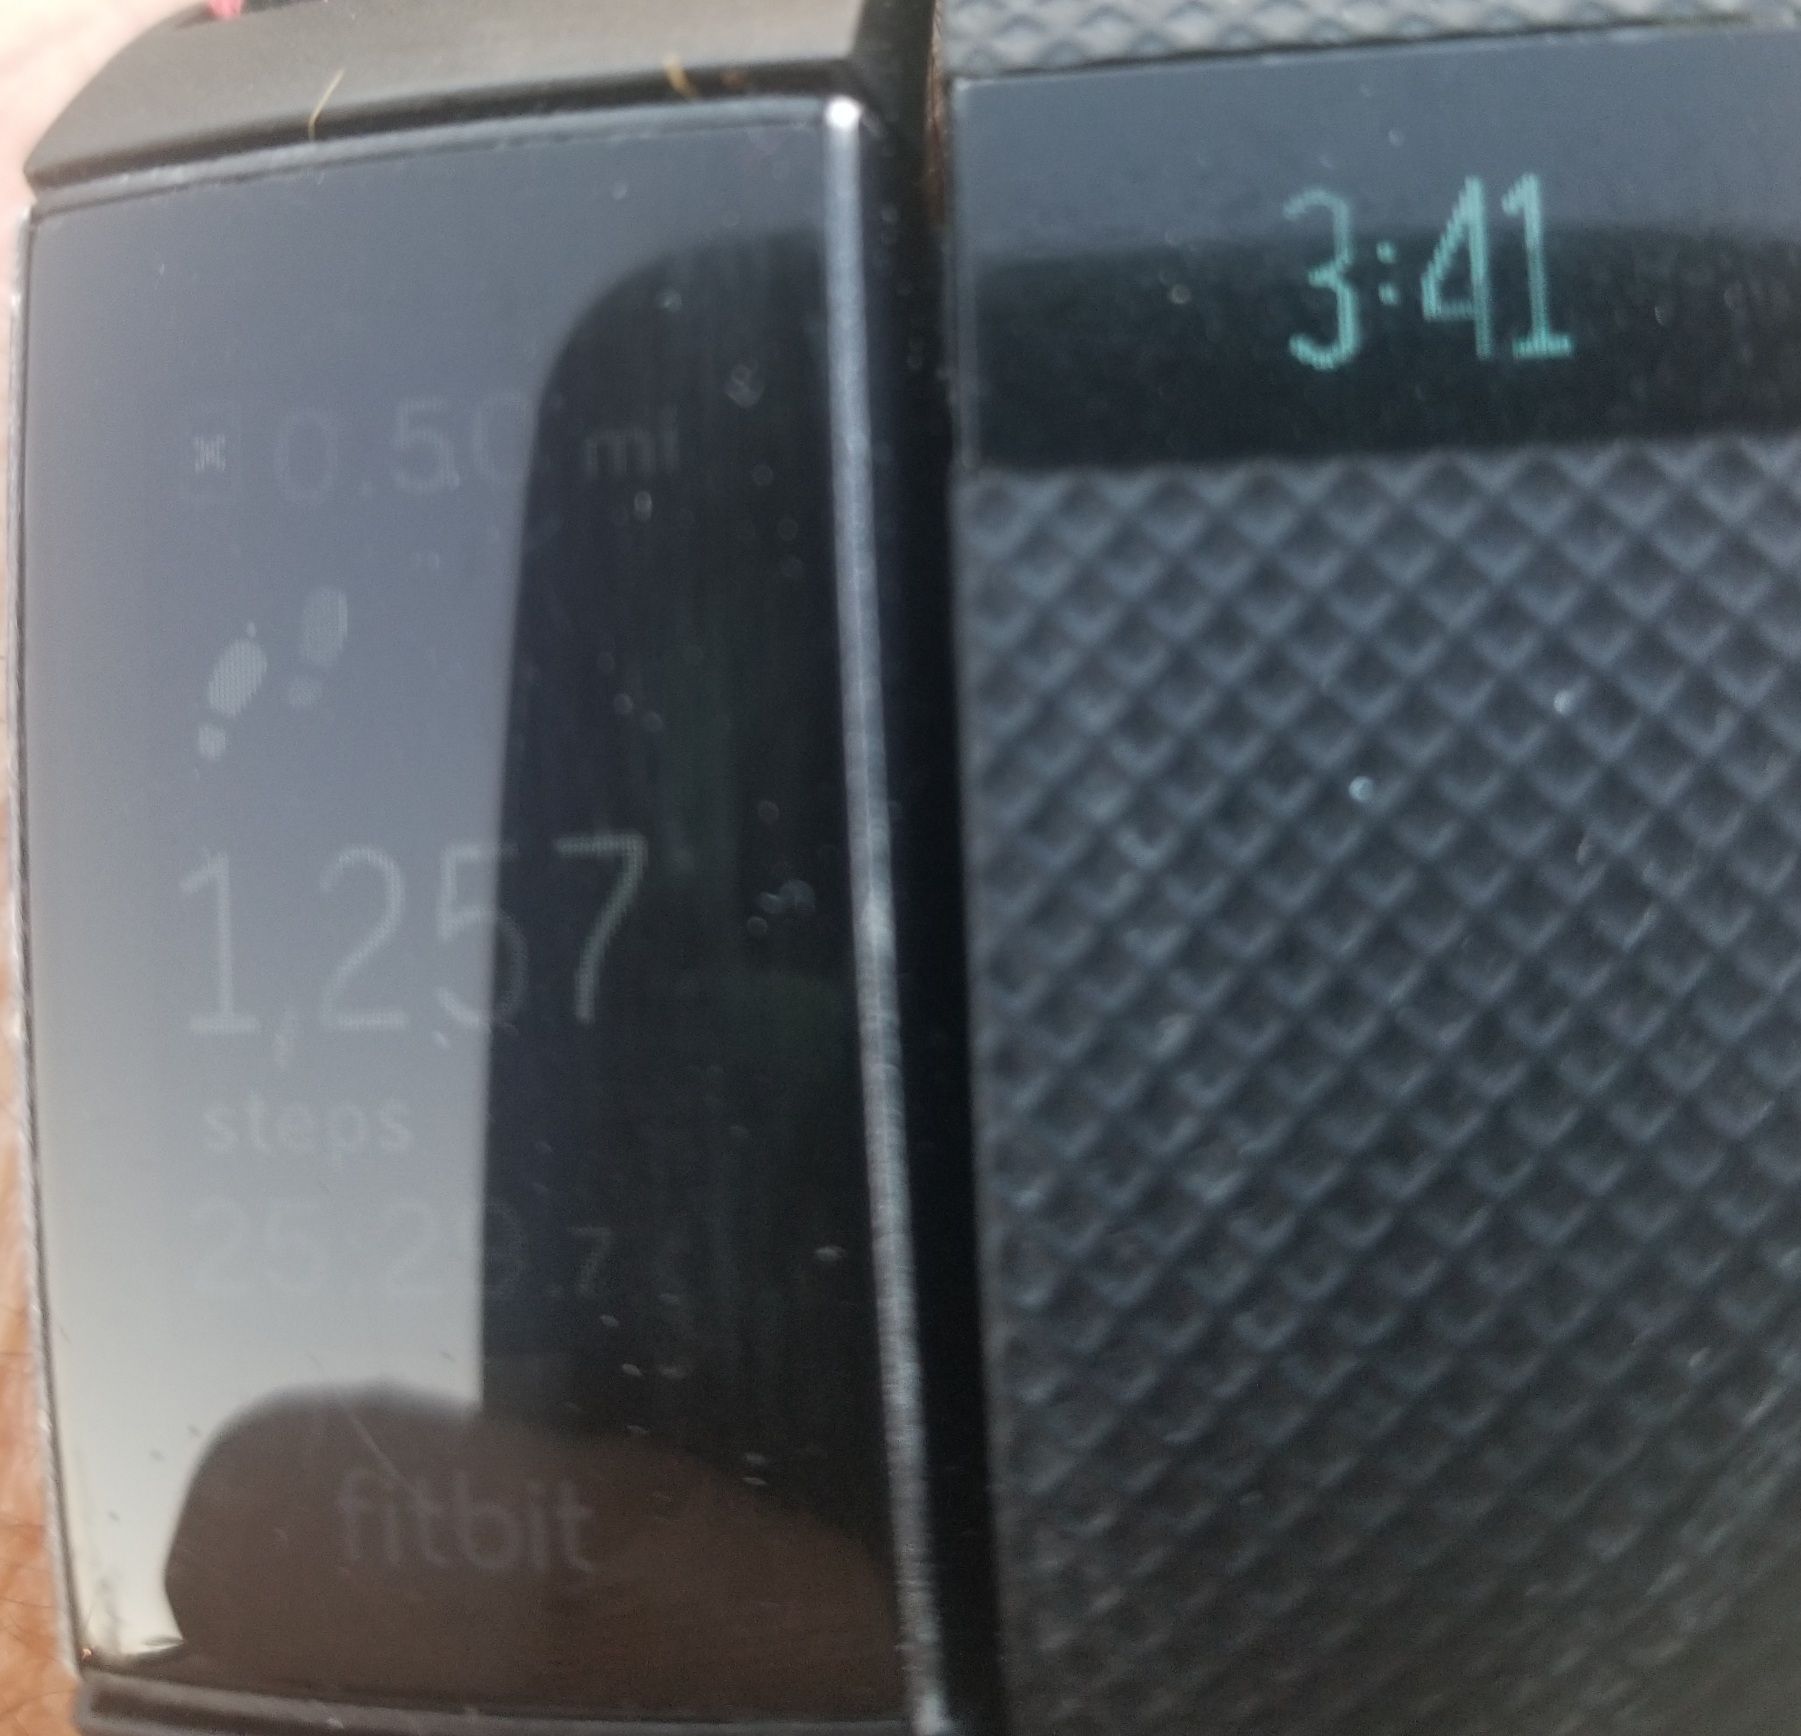 change brightness on fitbit charge 3